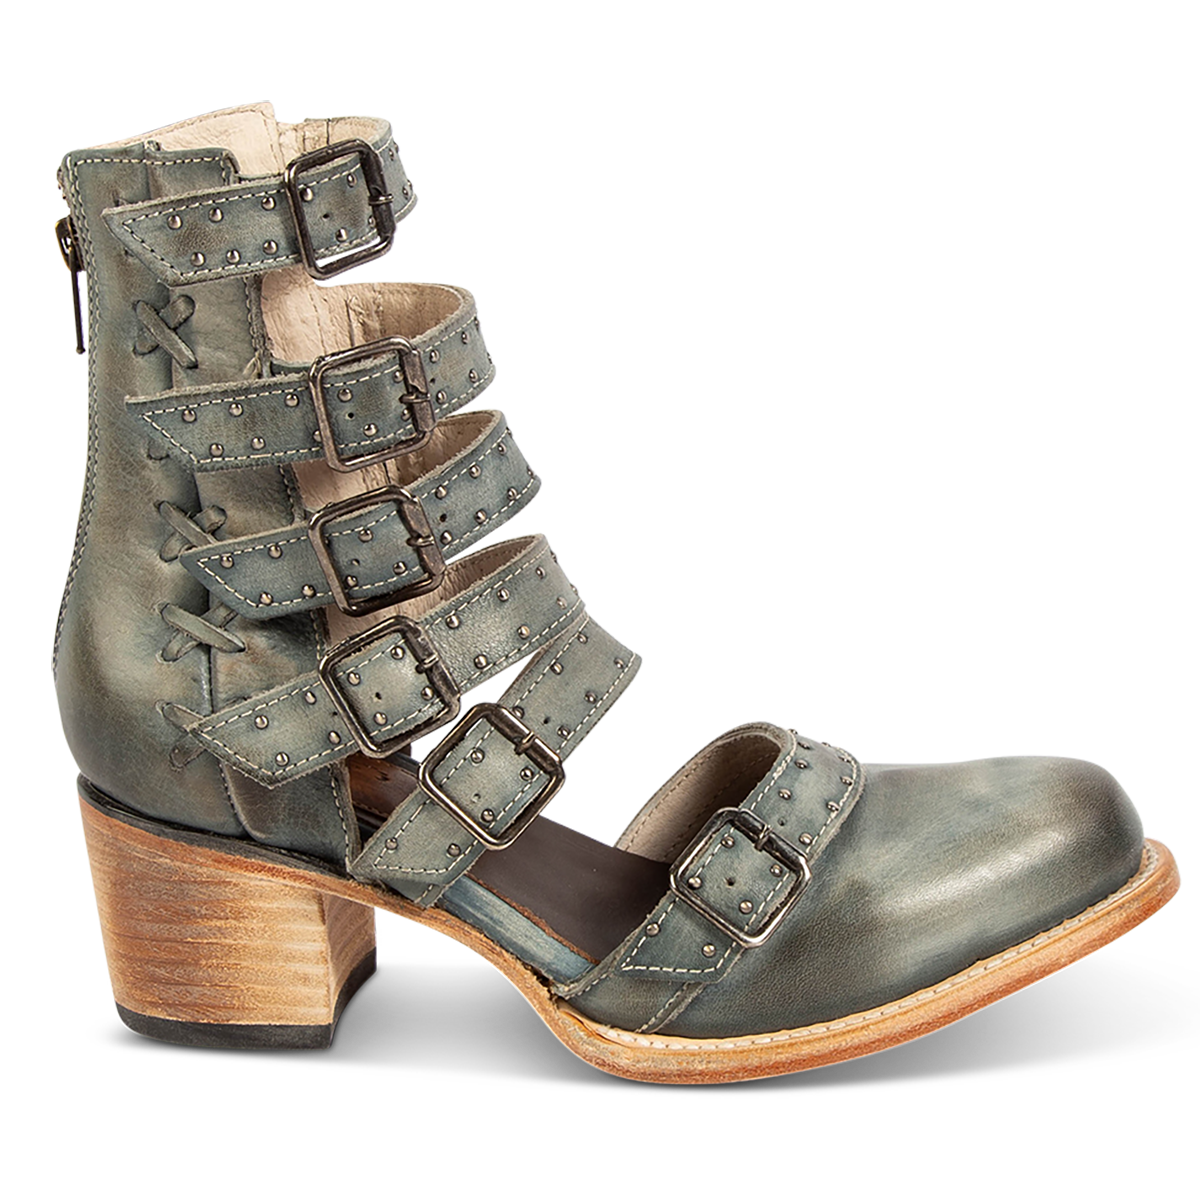 FREEBIRD women's Salty blue leather bootie with adjustable leather straps, a low block heel and an almond toe